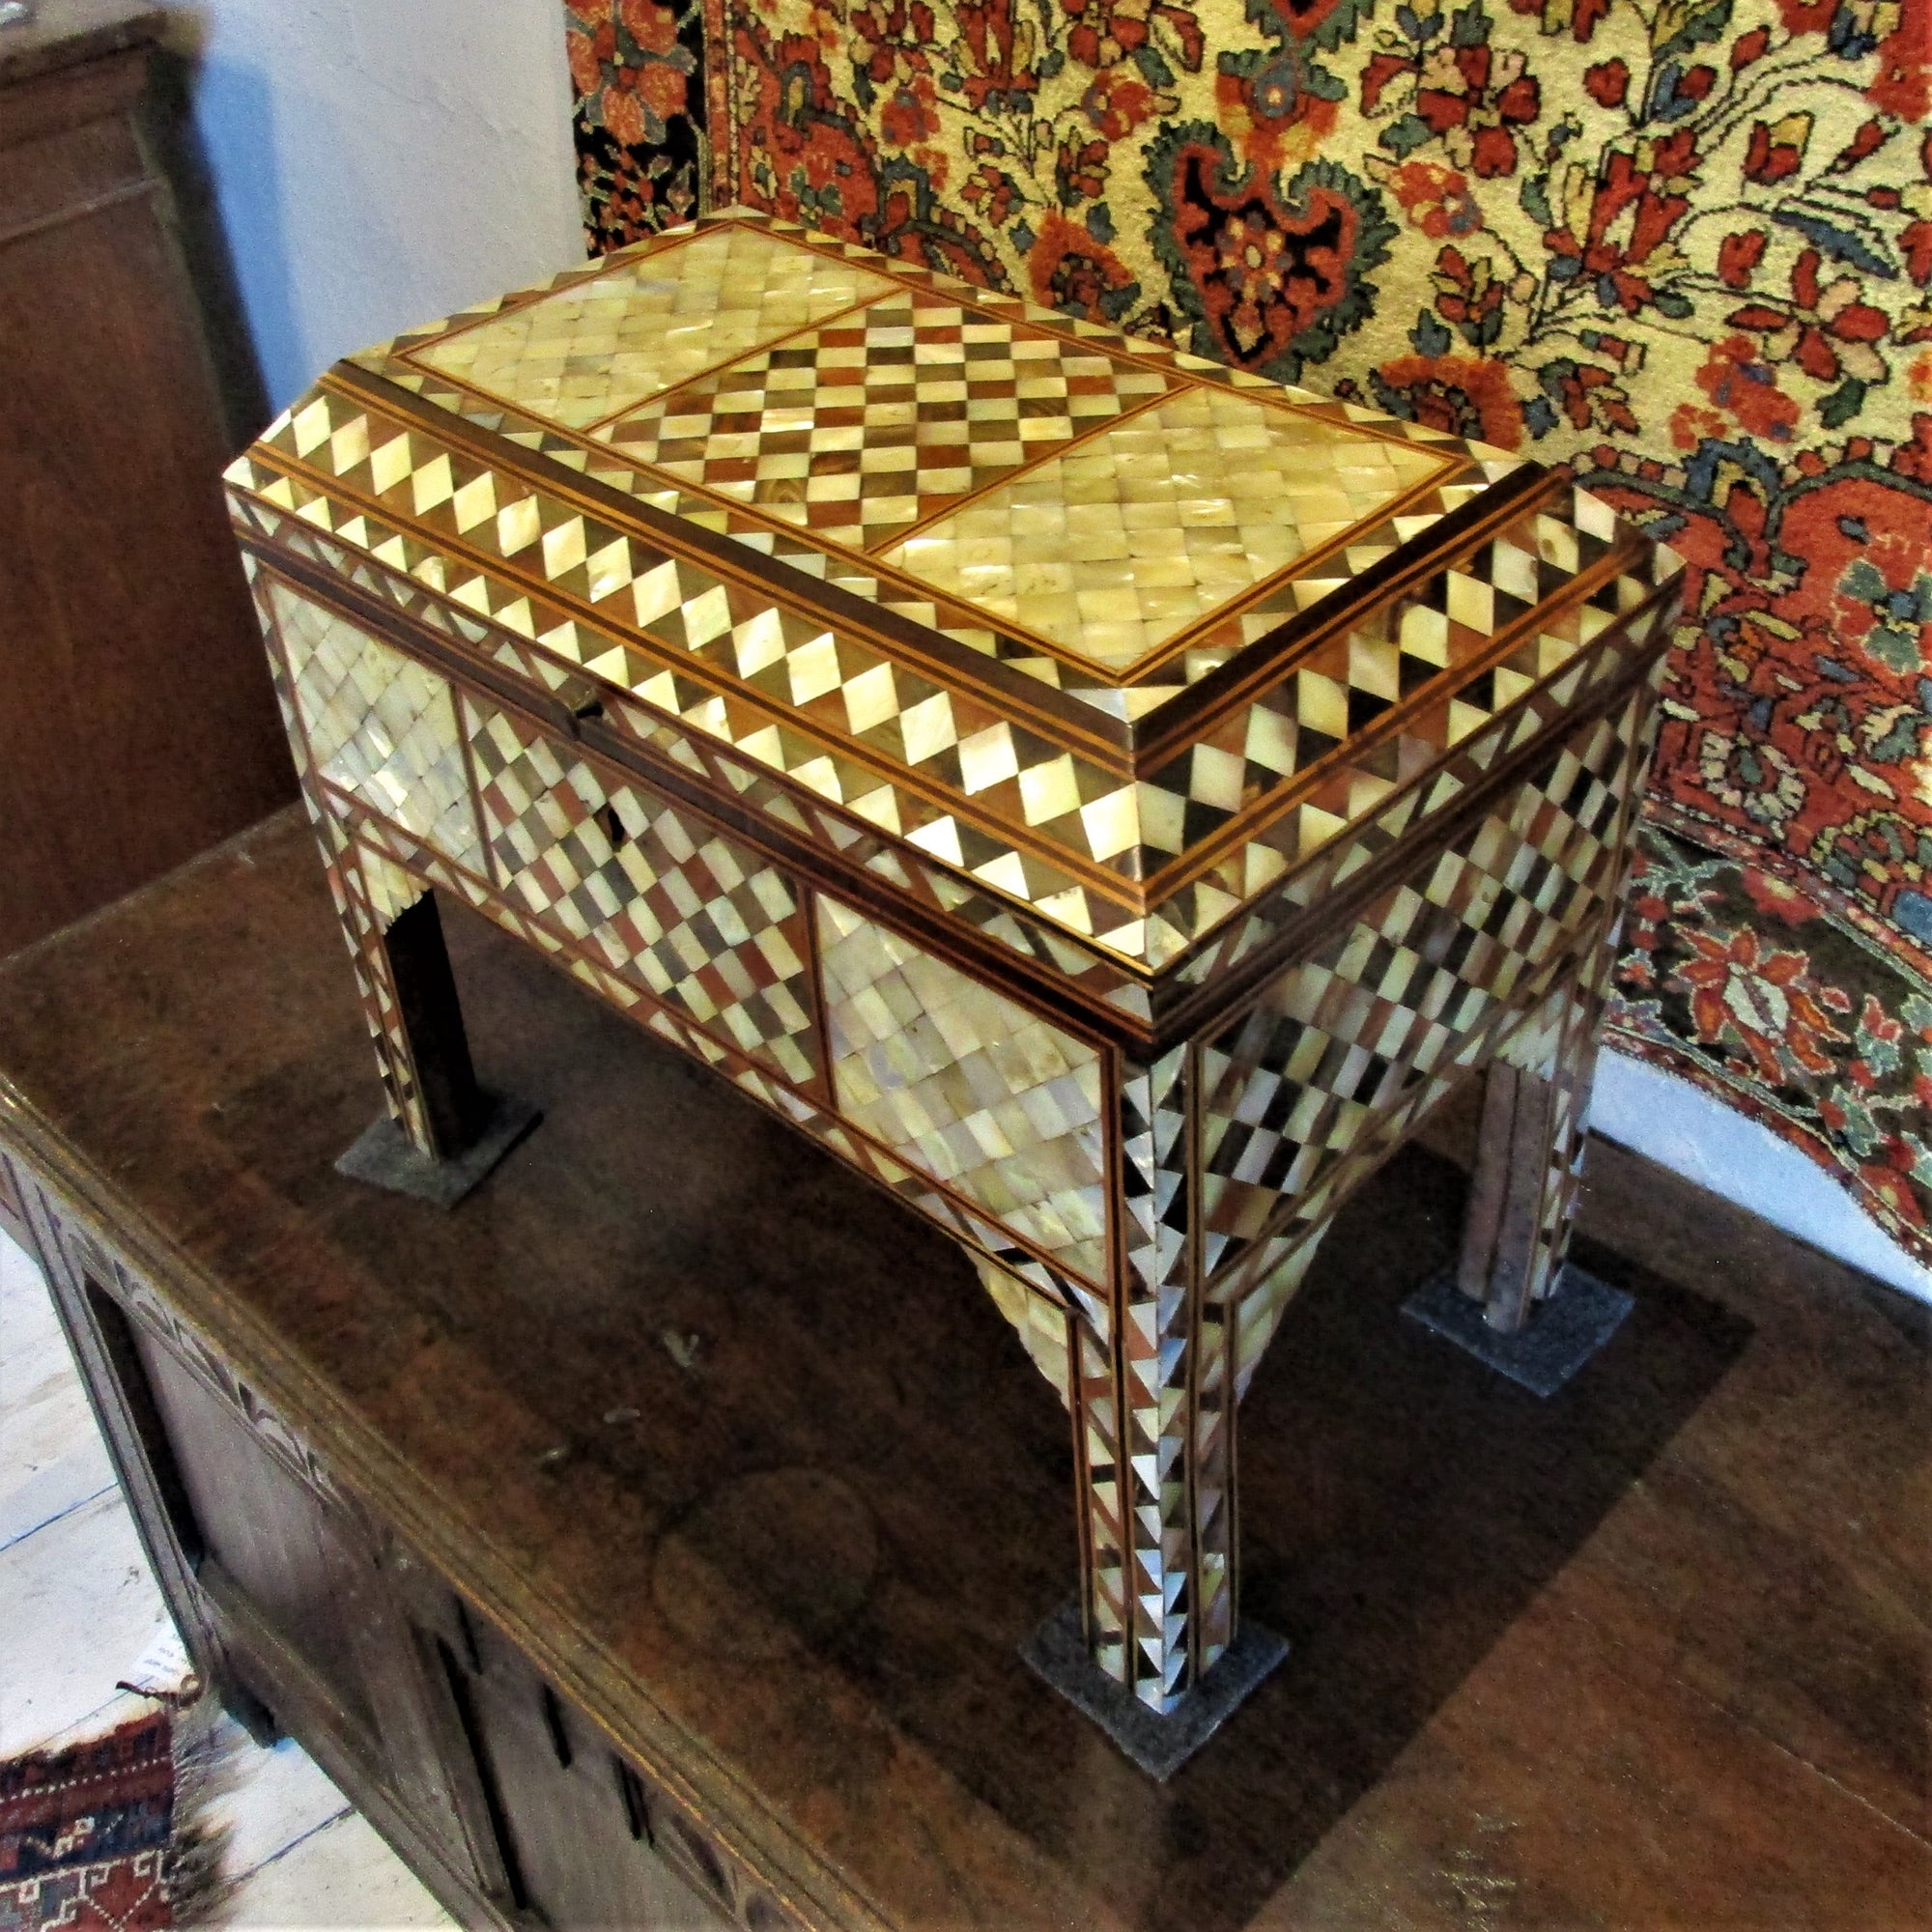 Discover Rare Treasures From The Ottoman Empire Here At Top Banana !